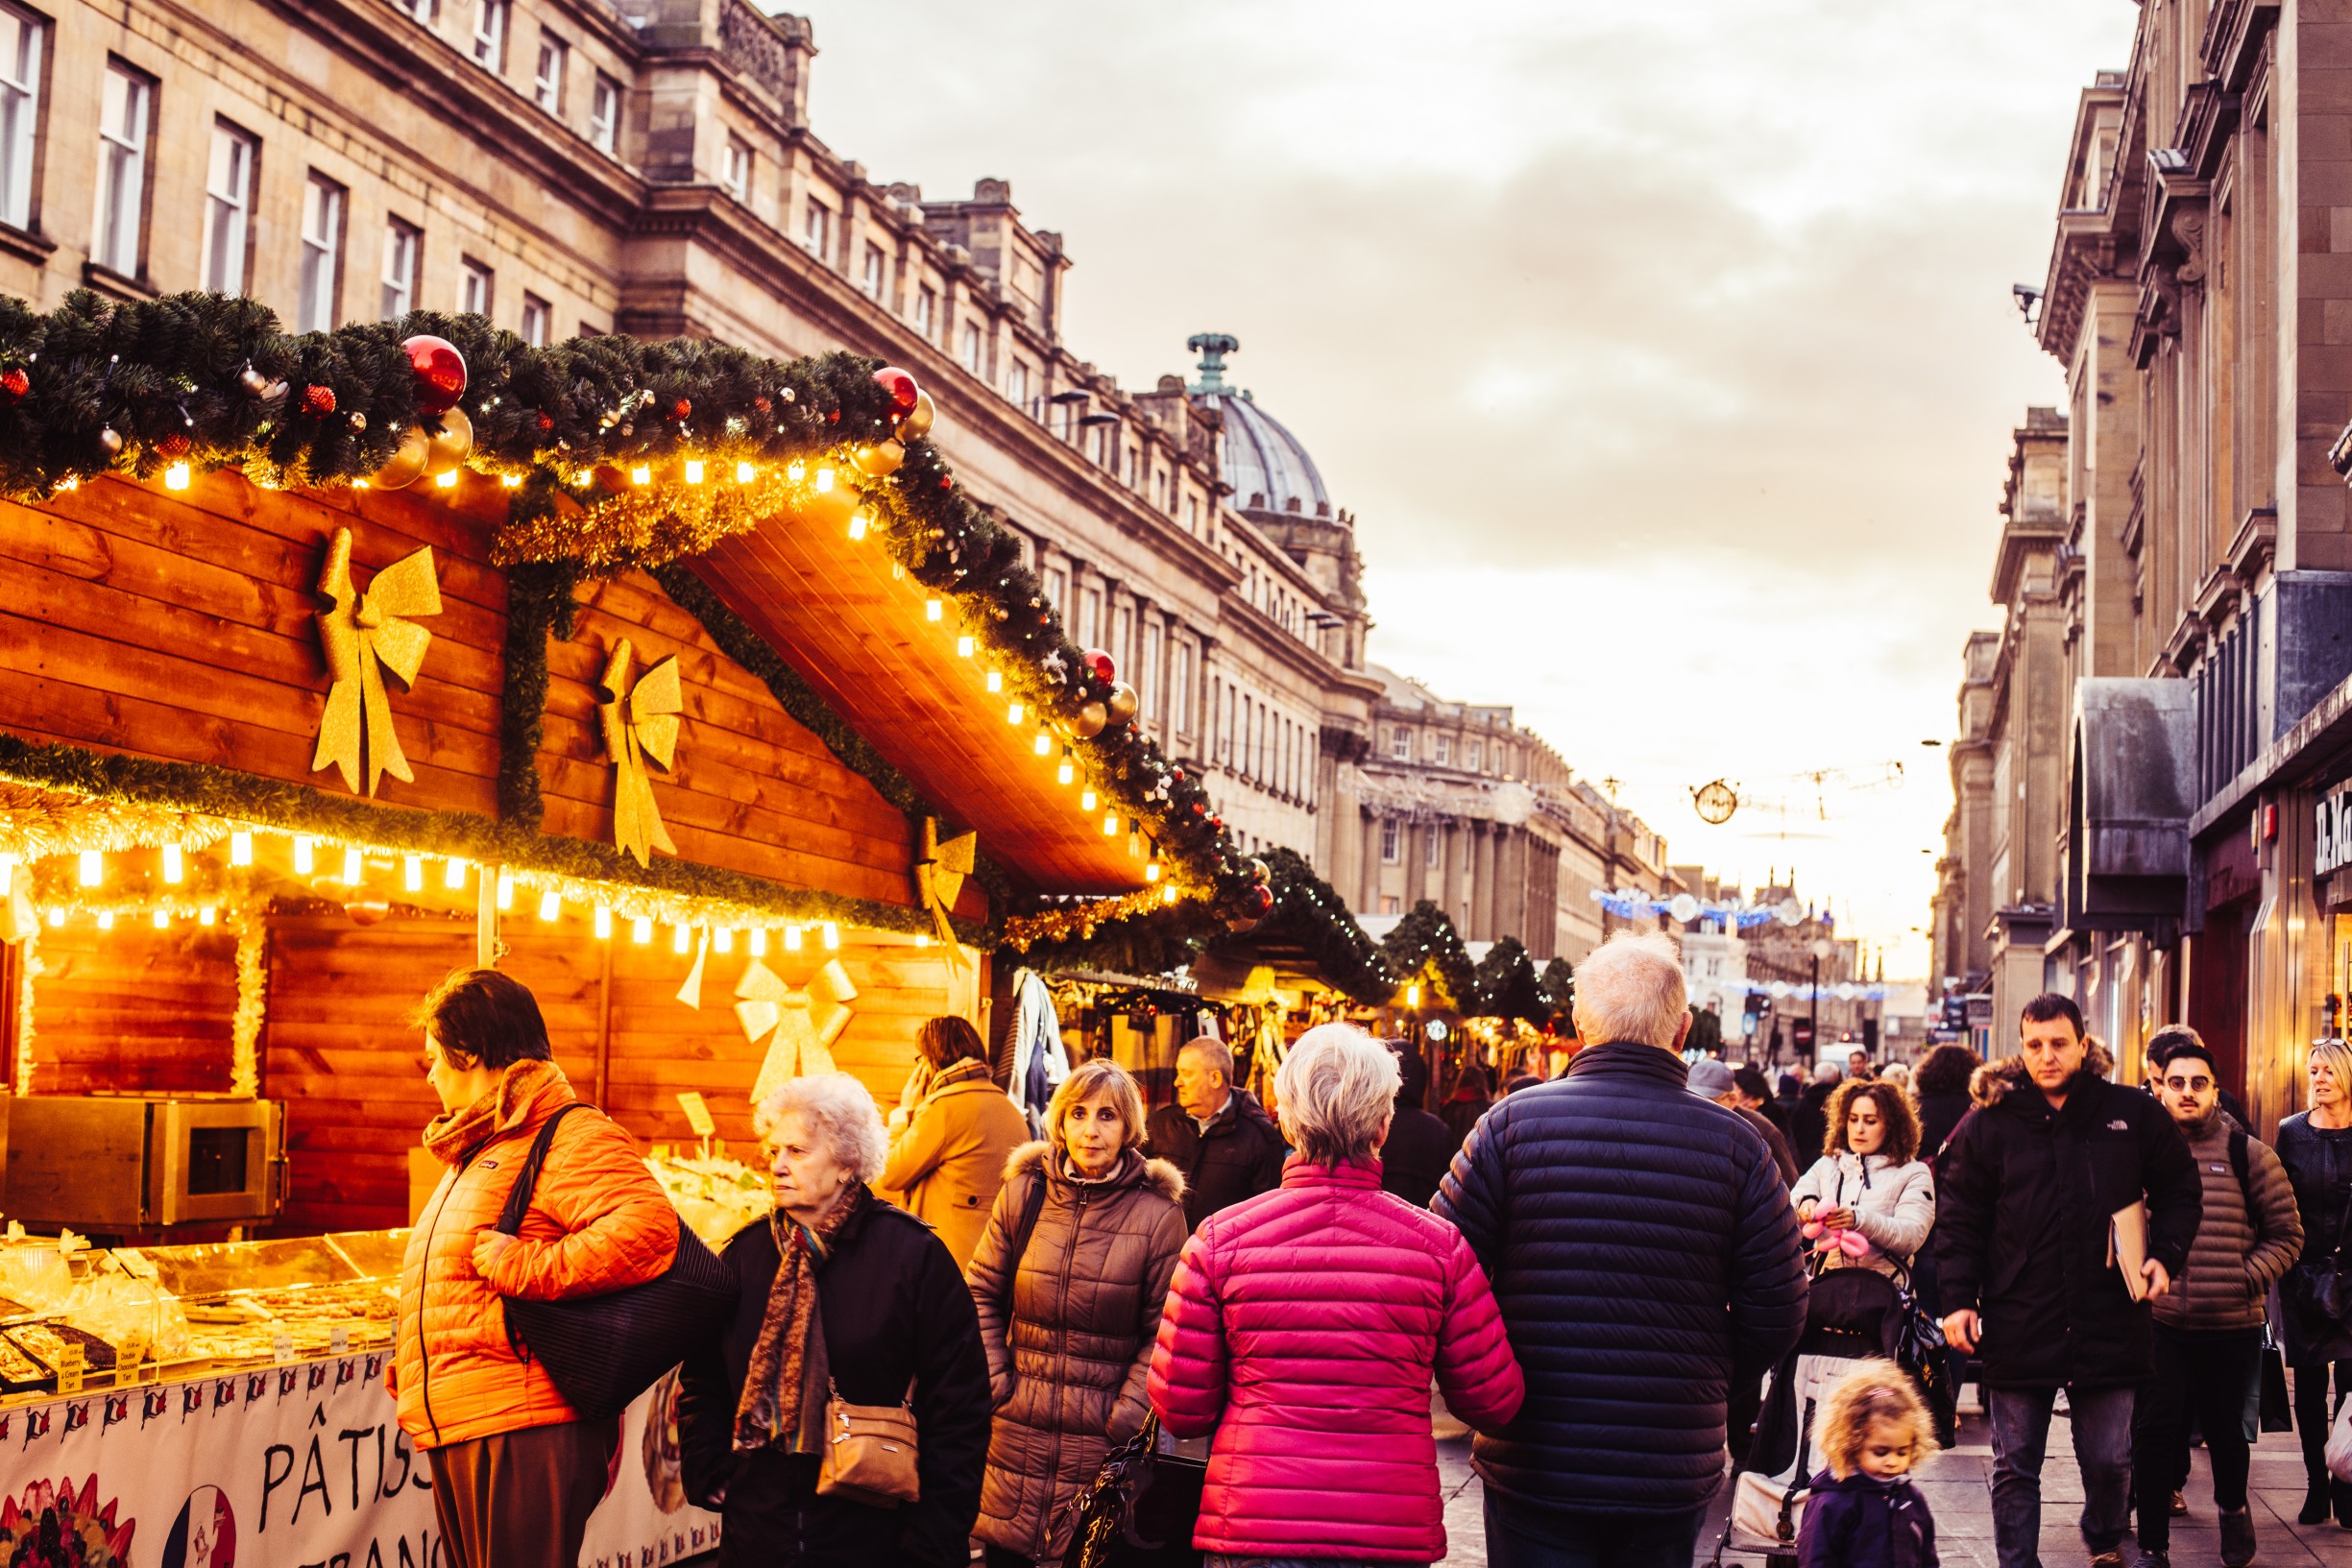 Newcastle's Christmas Markets during the day